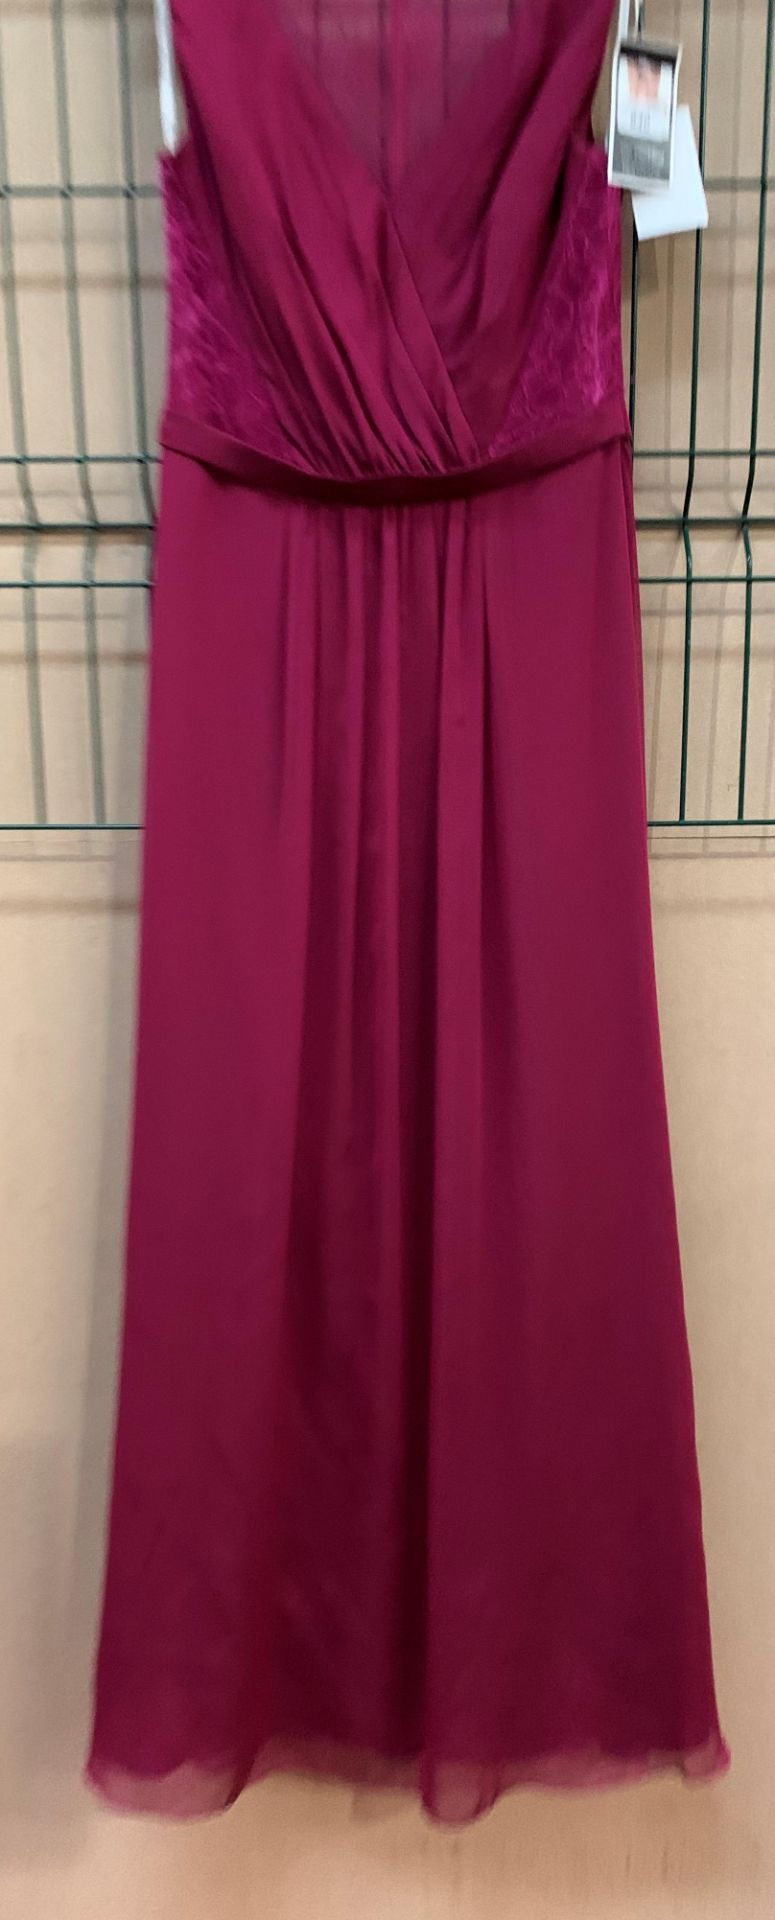 A bridesmaid/prom dress by Belsoie, mode